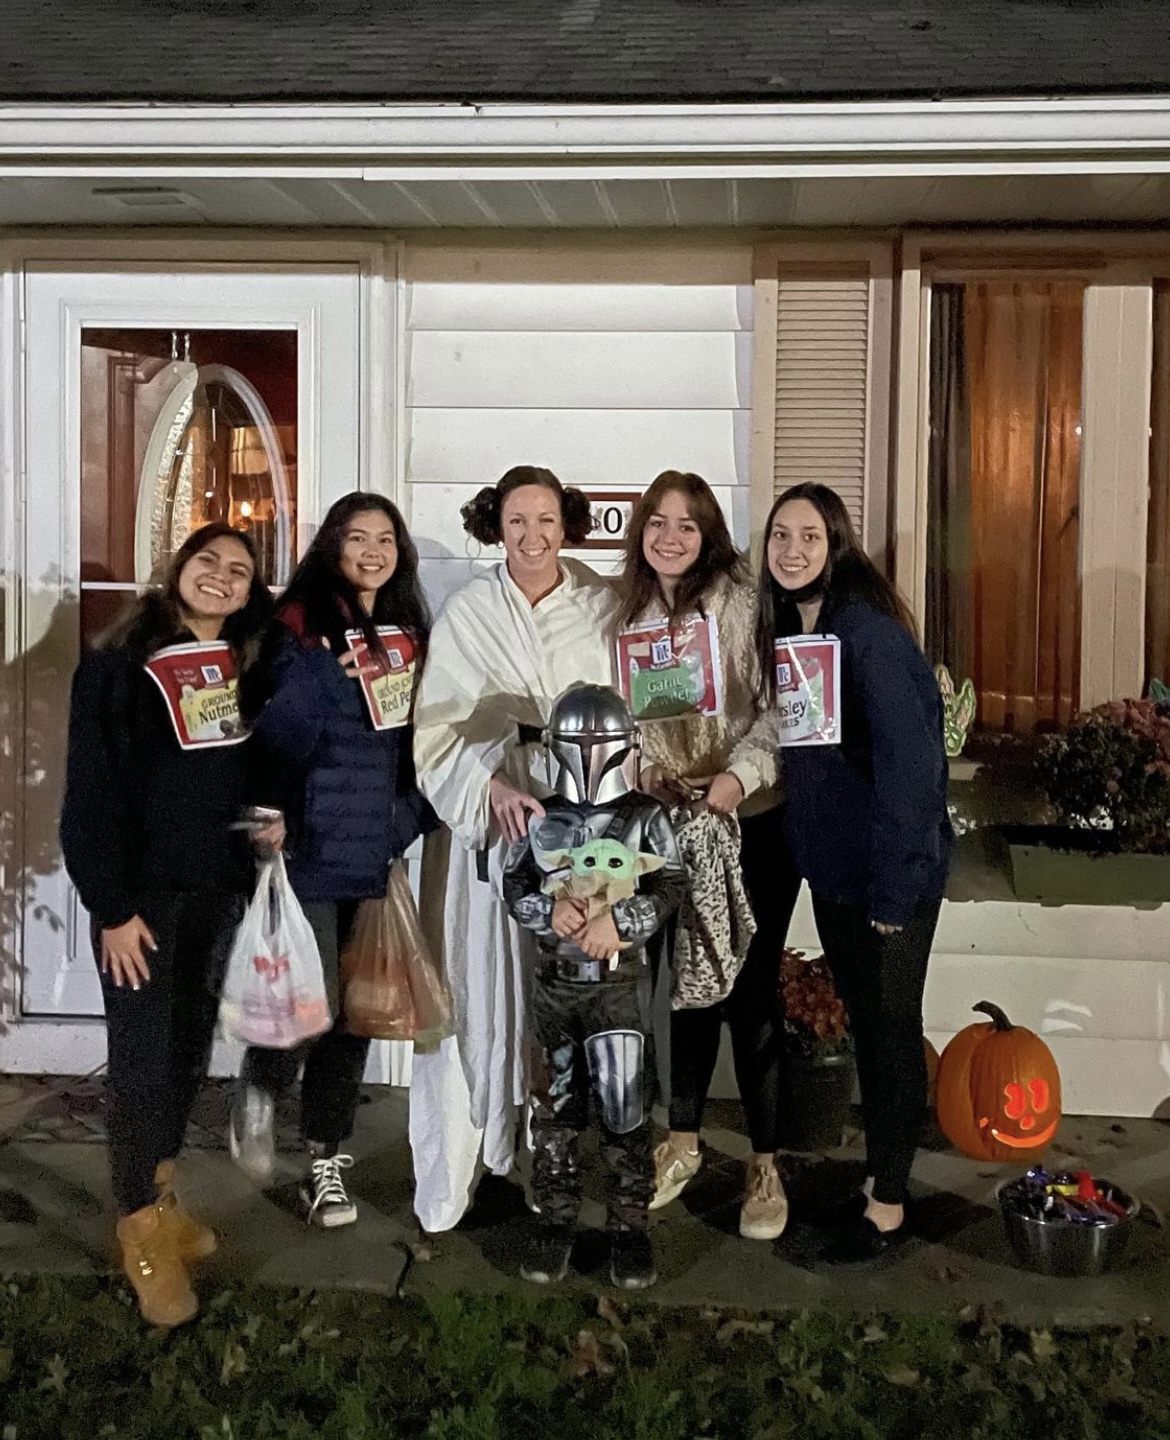 Dormers Participate in TrickorTreat on Campus! The Linsly Line